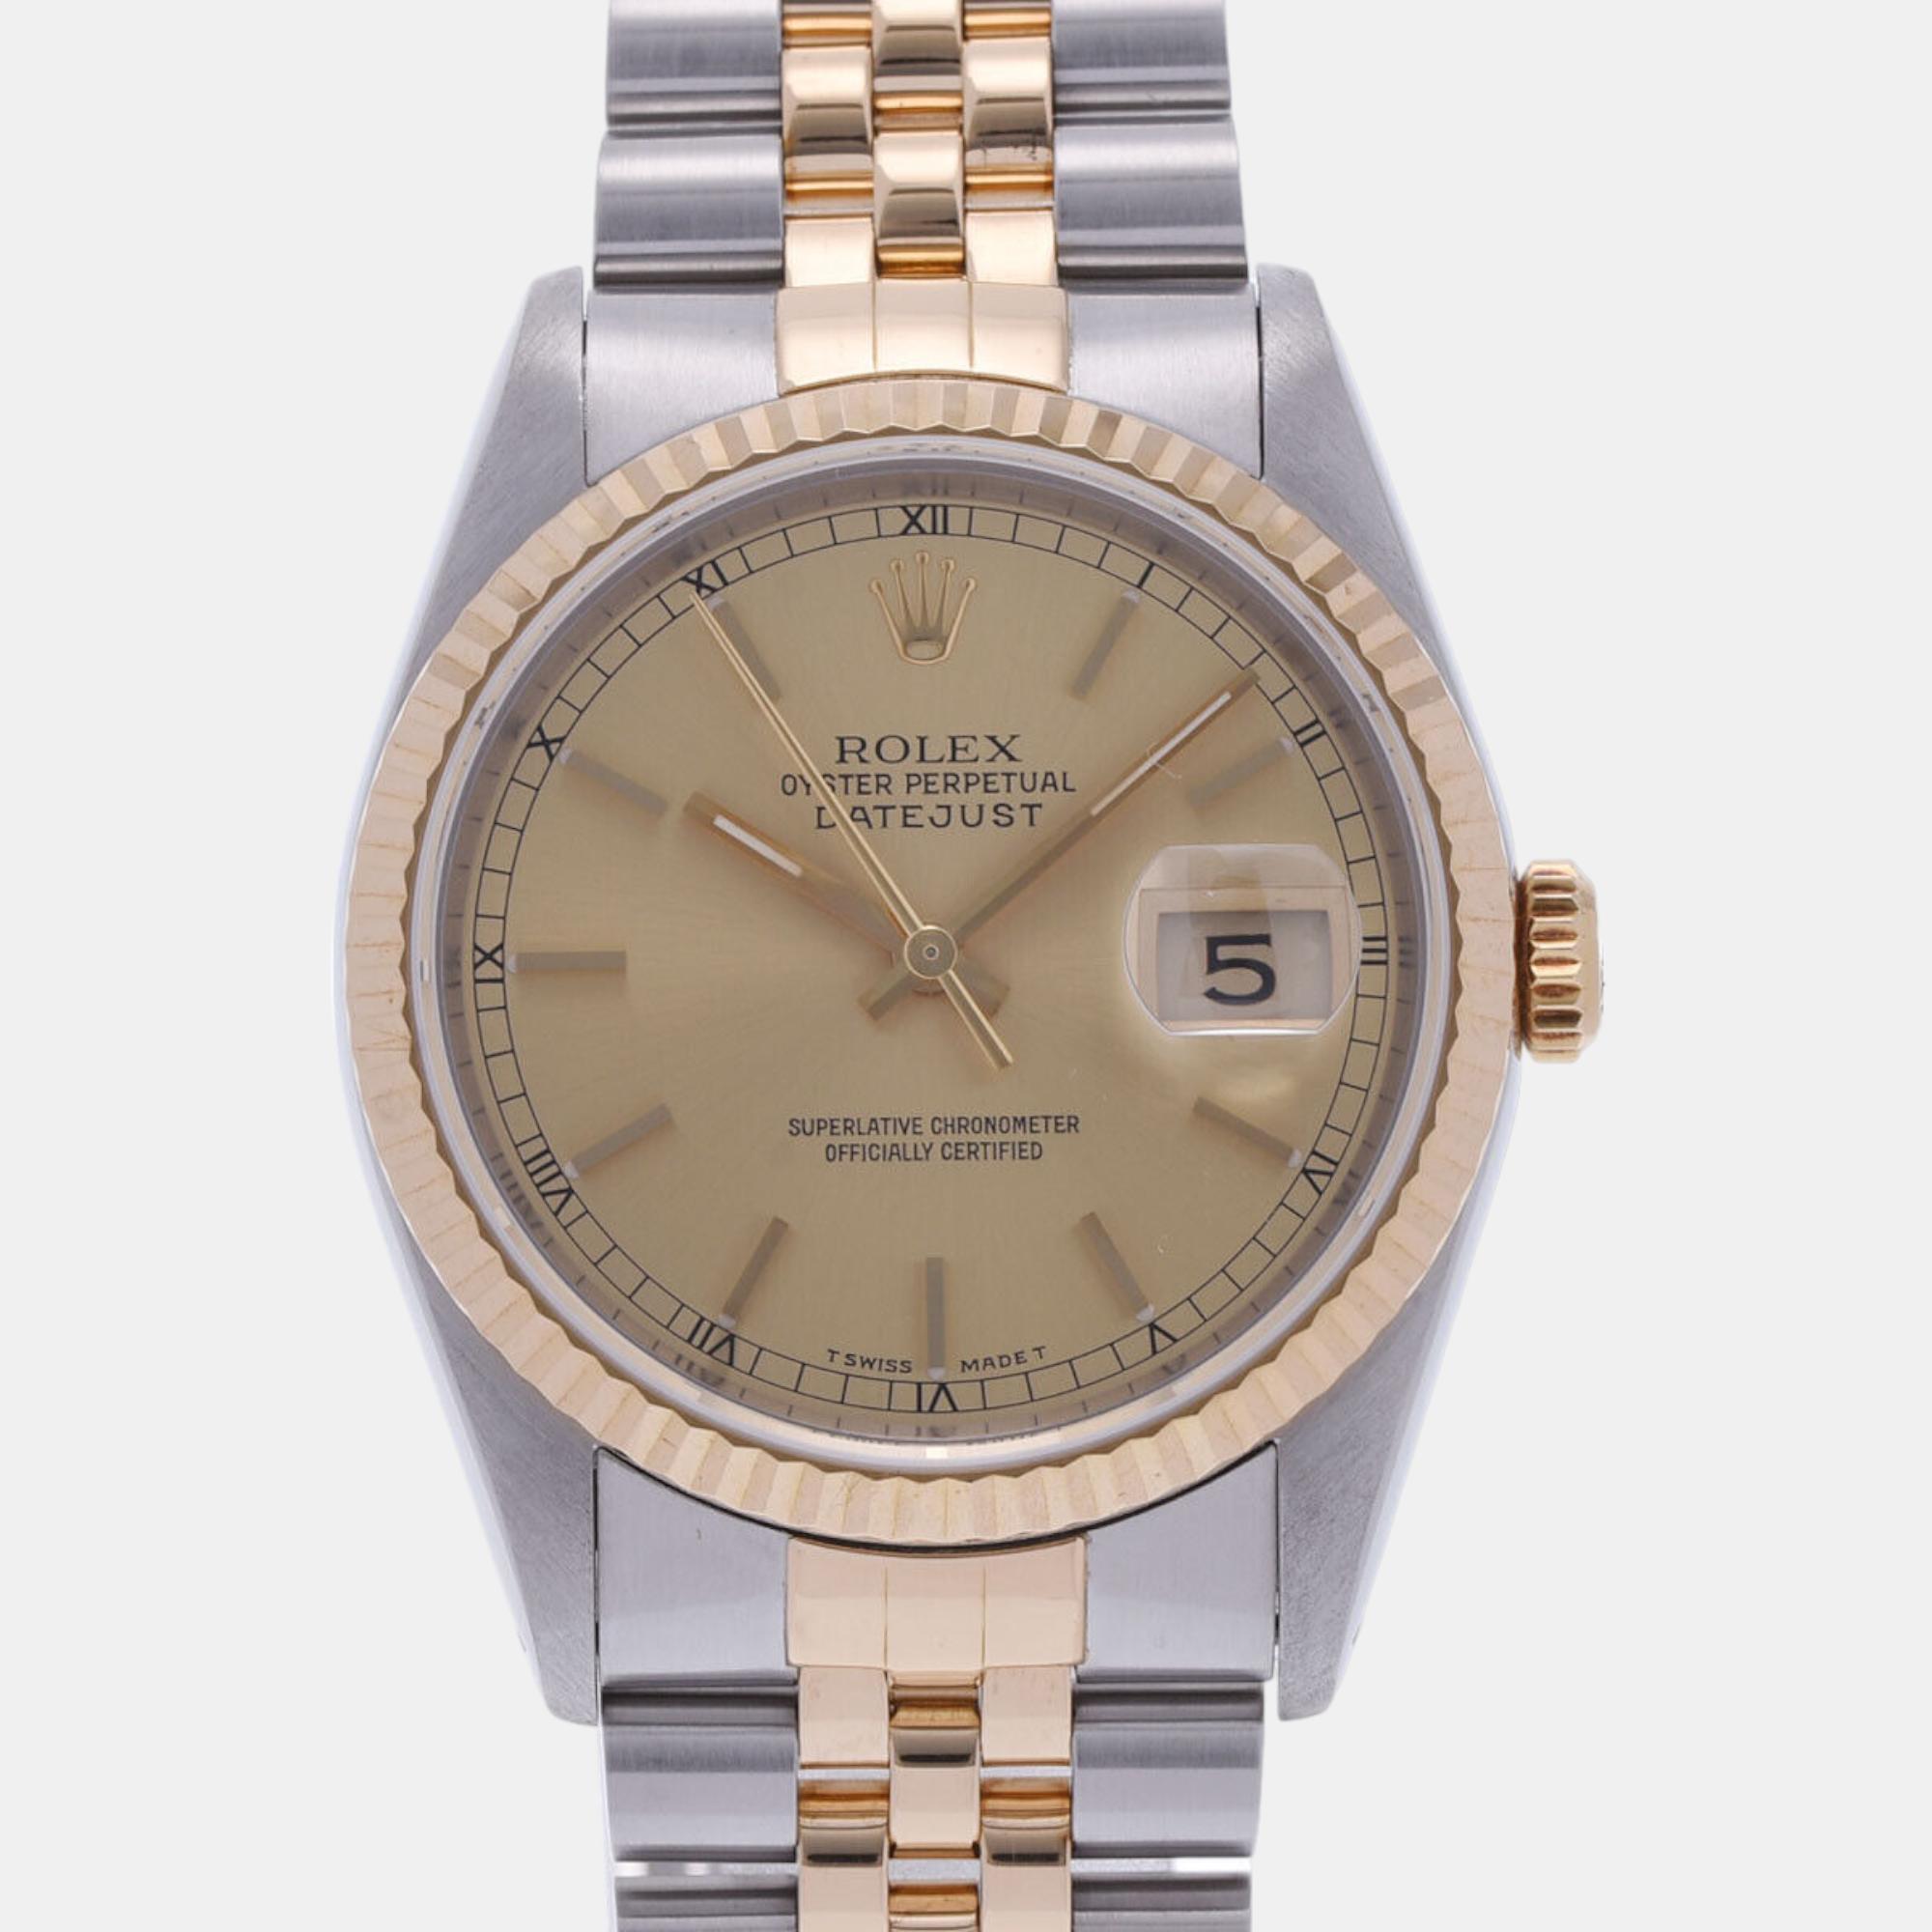 Pre-owned Rolex Champagne 18k Yellow Gold And Stainless Steel Datejust 16233 Automatic Men's Wristwatch 36 Mm